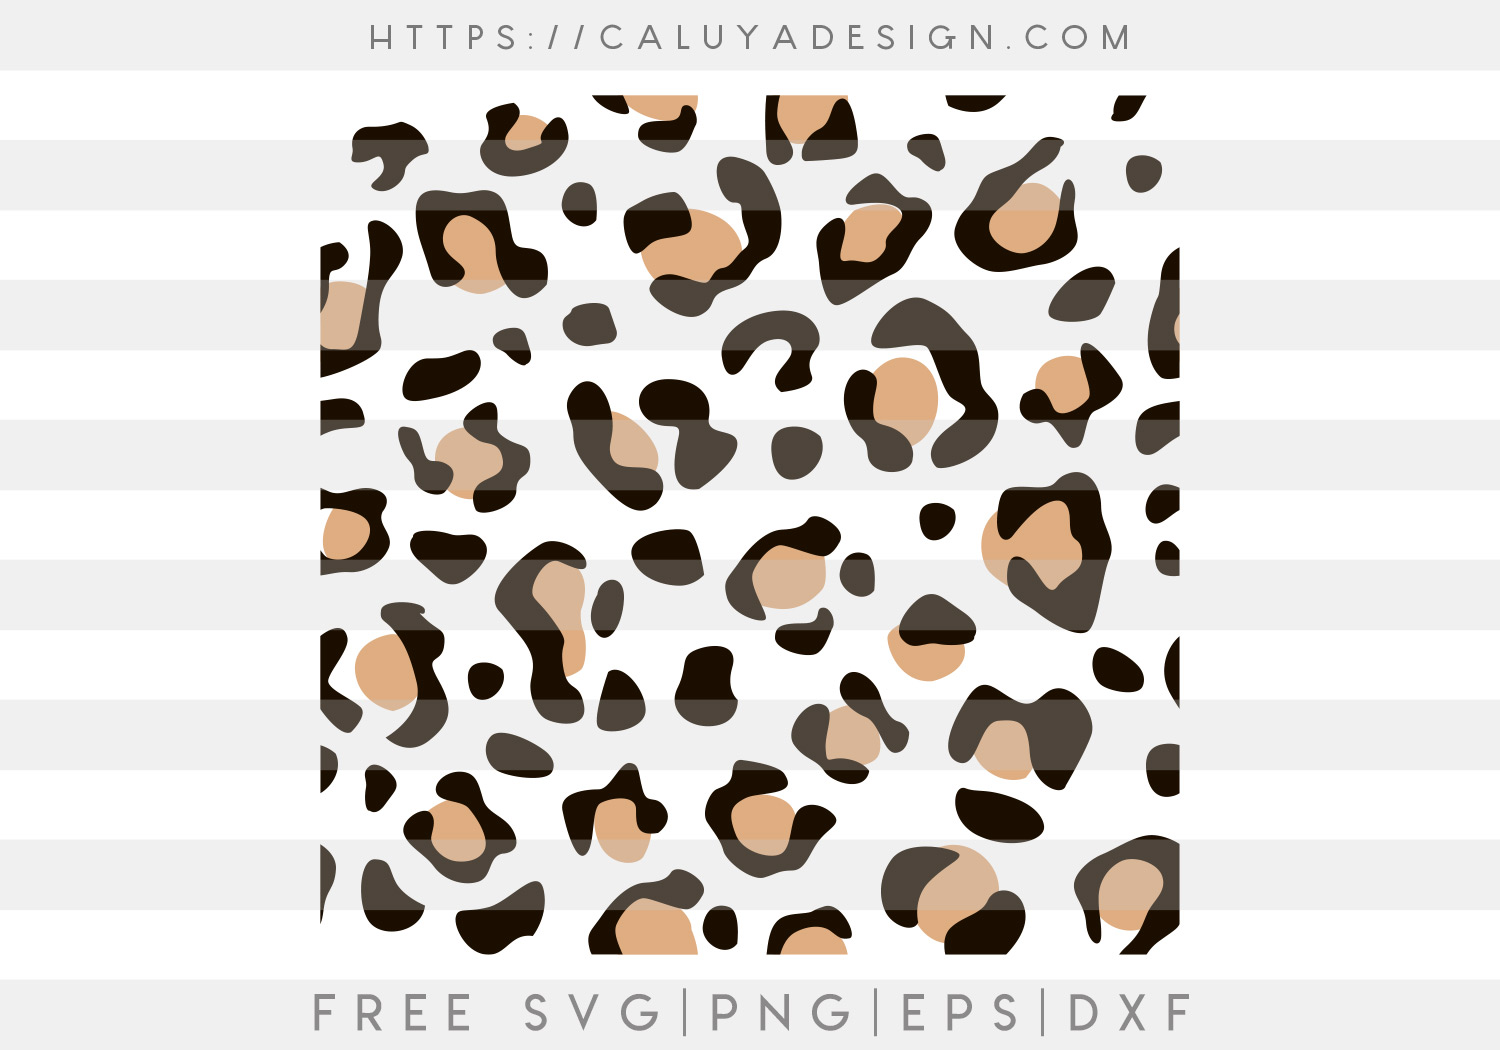 Download Free Colored Leopard Svg Png Eps Dxf By Caluya Design